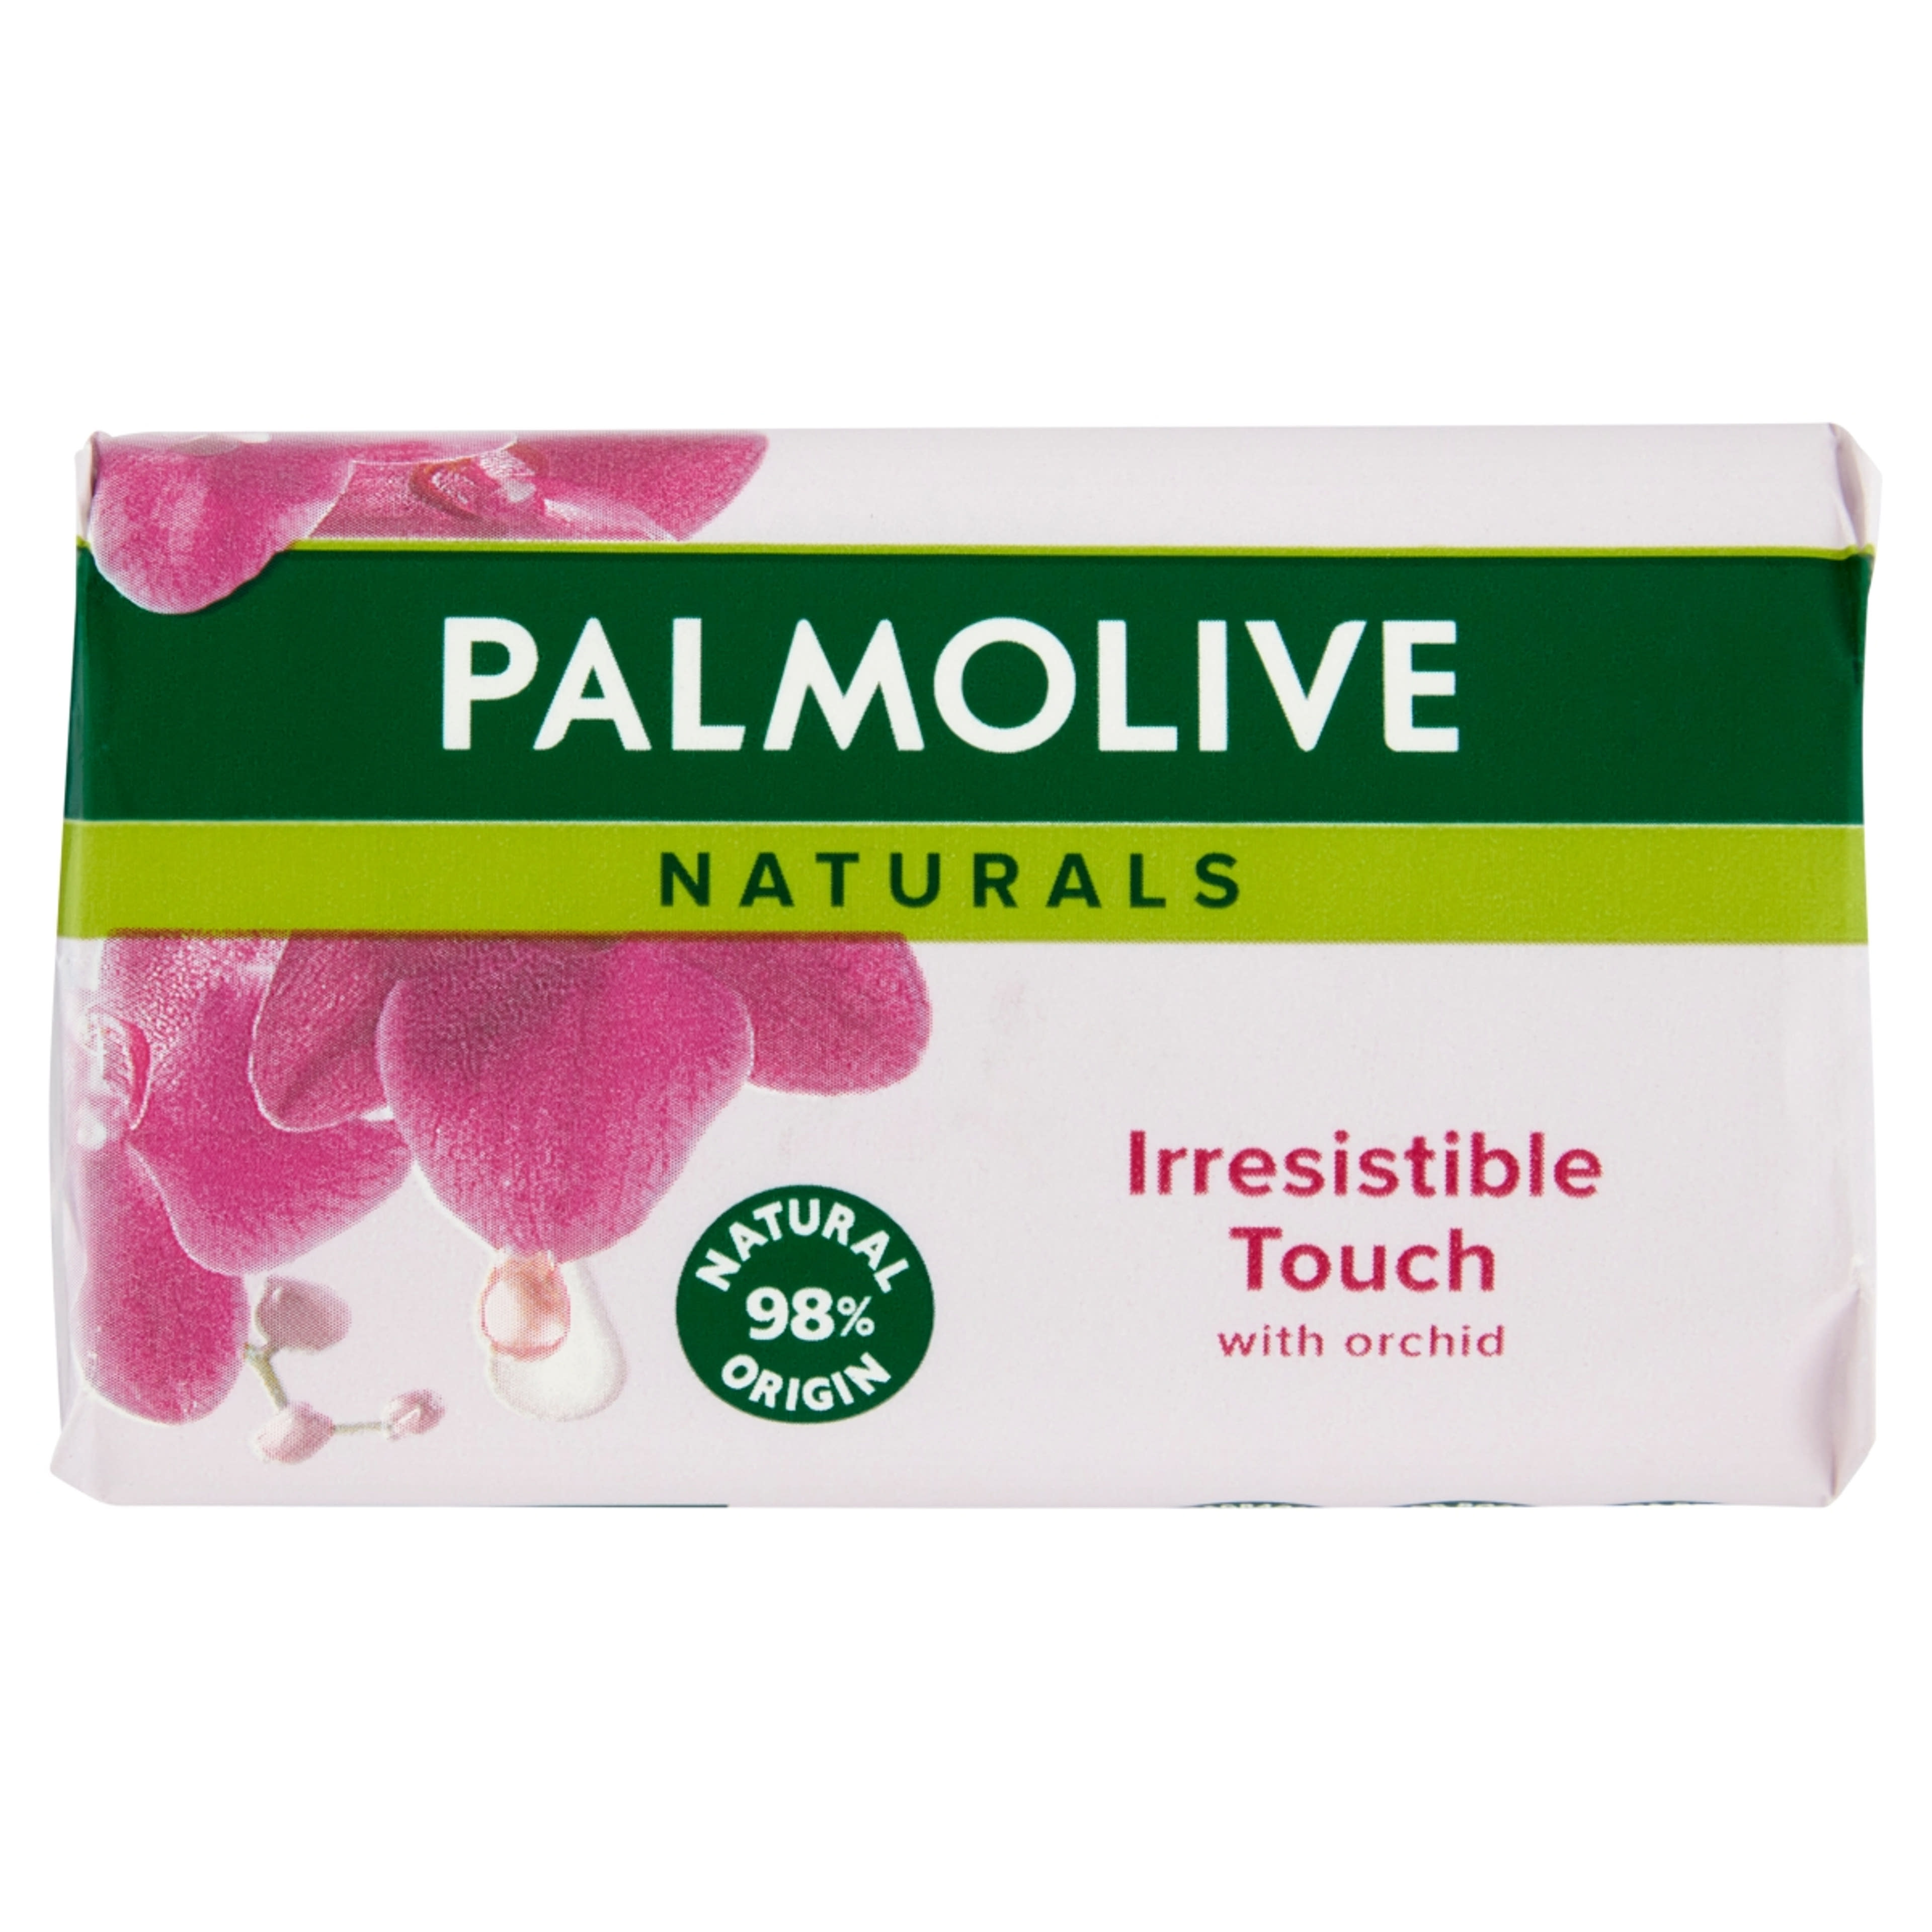 Palmolive Naturals Irresistible Touch with Orchid pipereszappan - 90 g-1